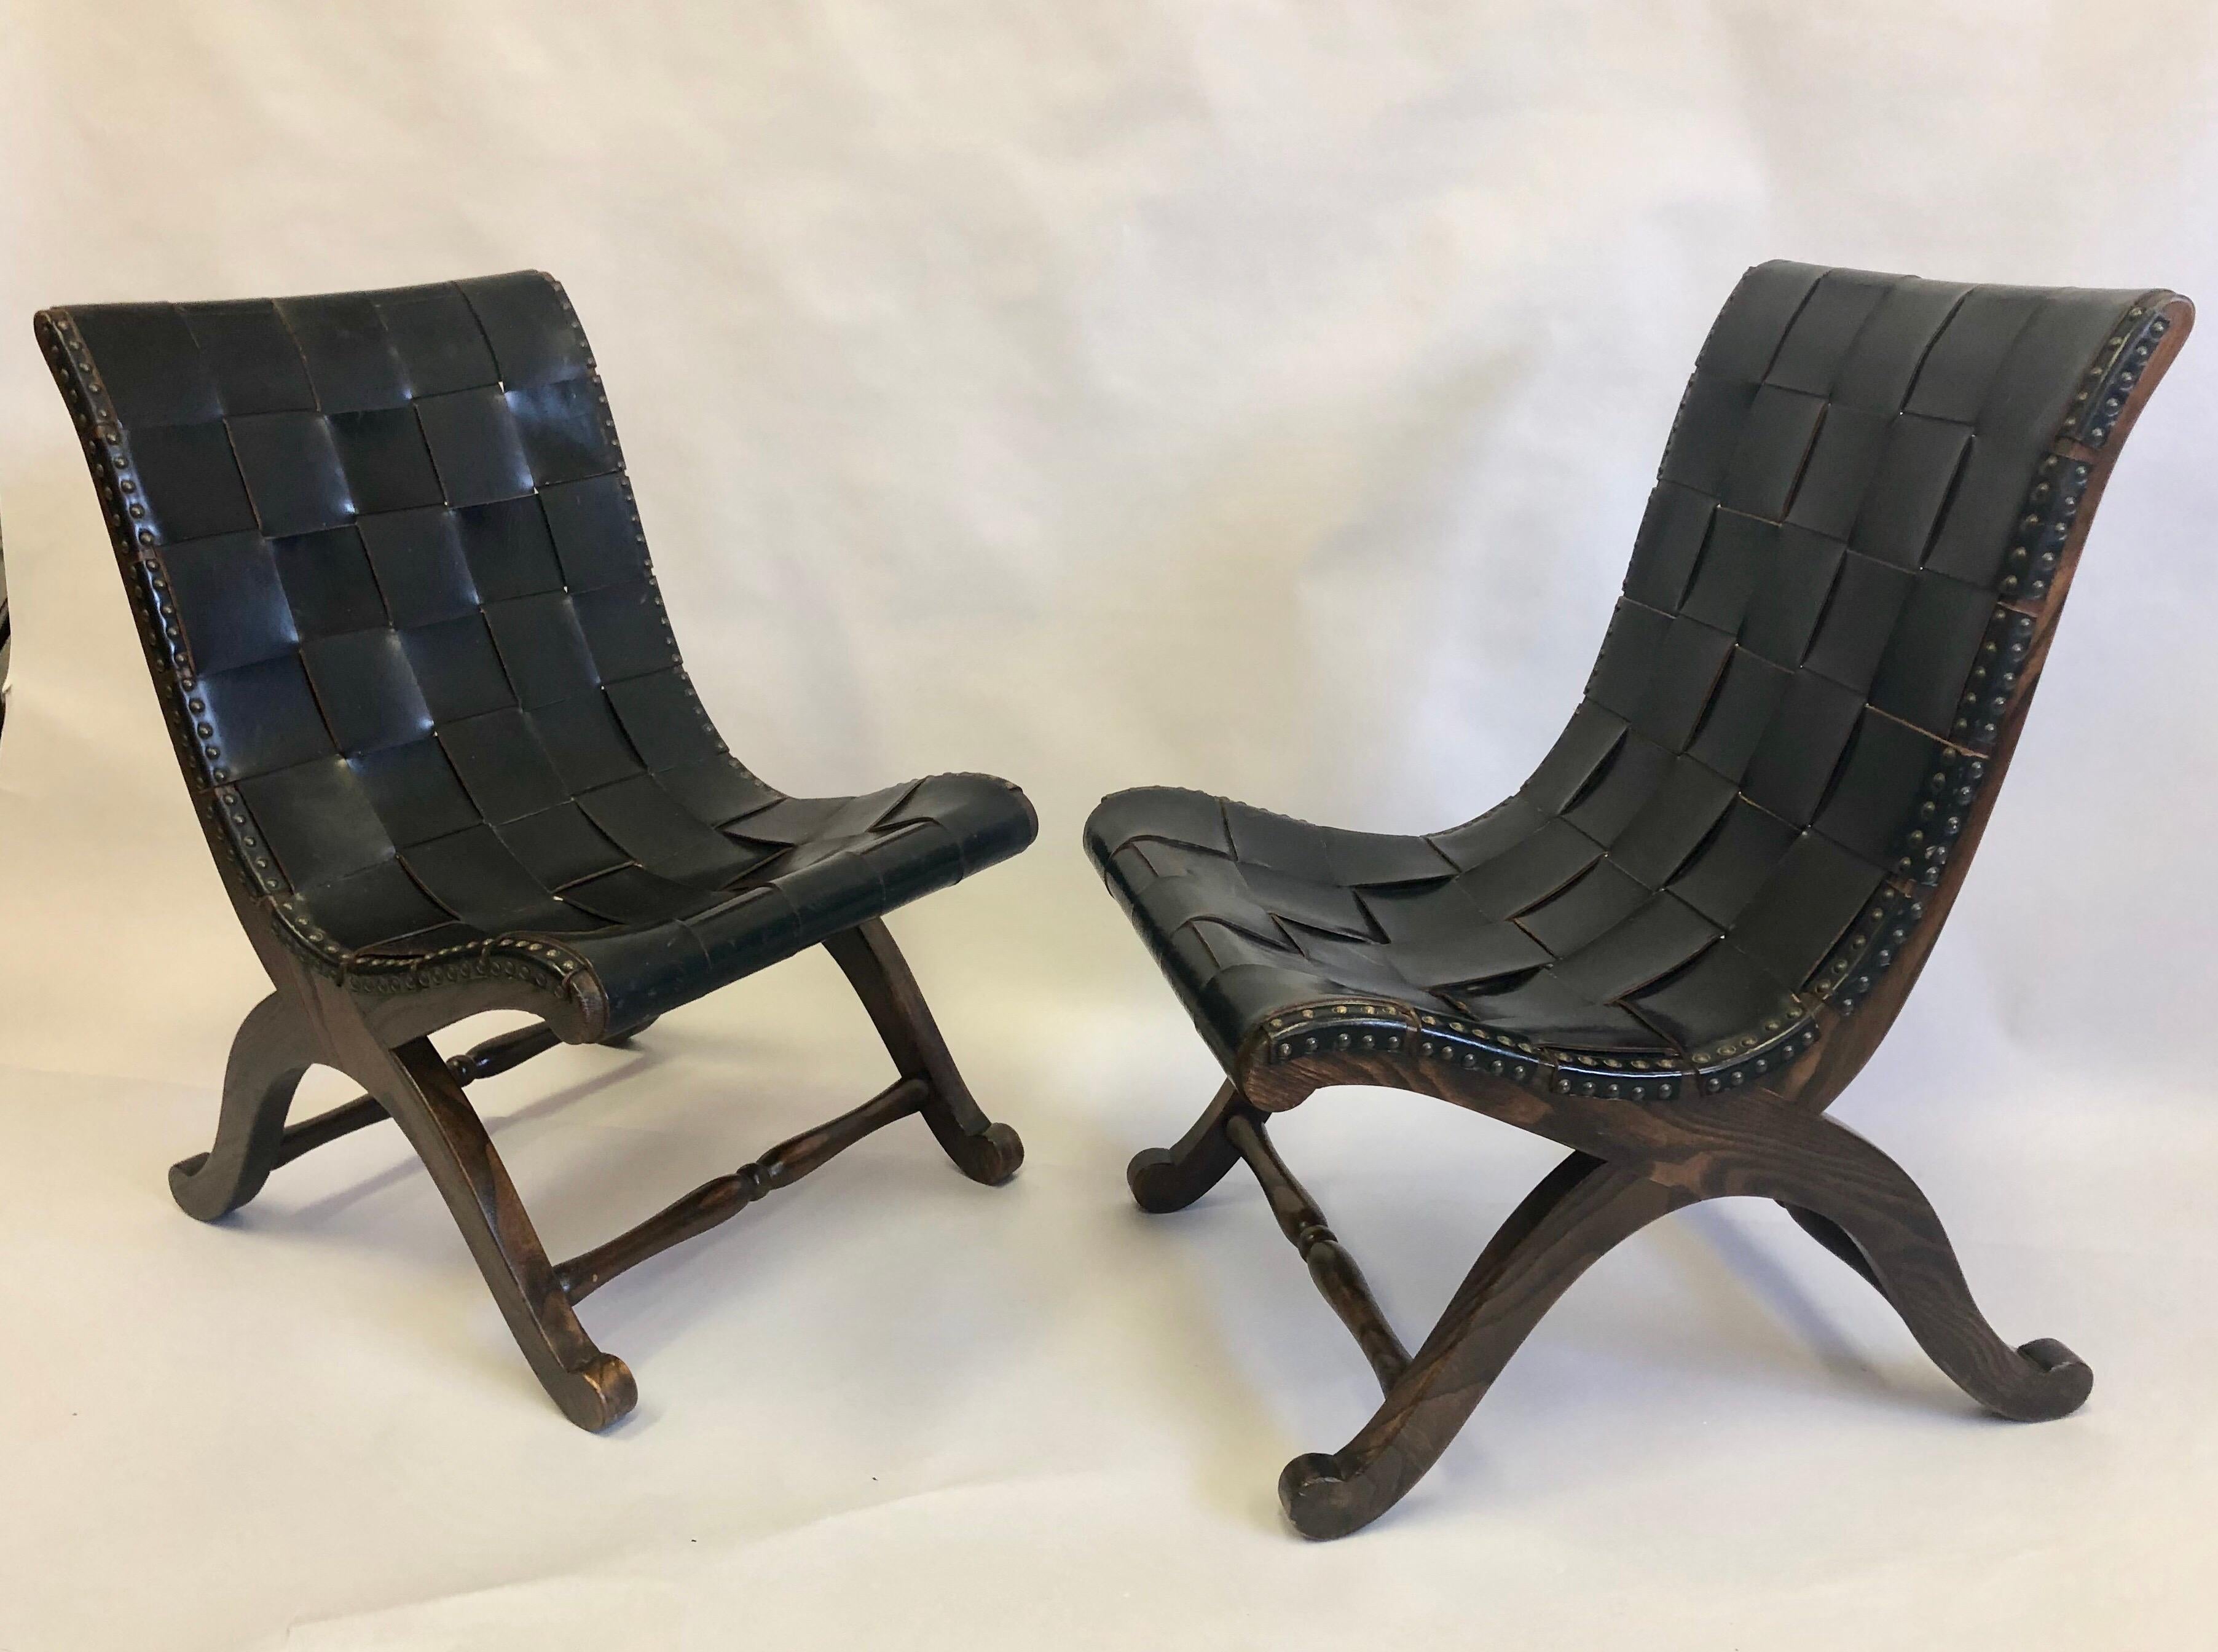 Elegant and timeless pair of French Mid-Century Modern neoclassical black leather strap lounge or slipper chairs attributed to Pierre Lottier. The walnut wood frames are arranged in a classical curile X-form and the black leather straps are